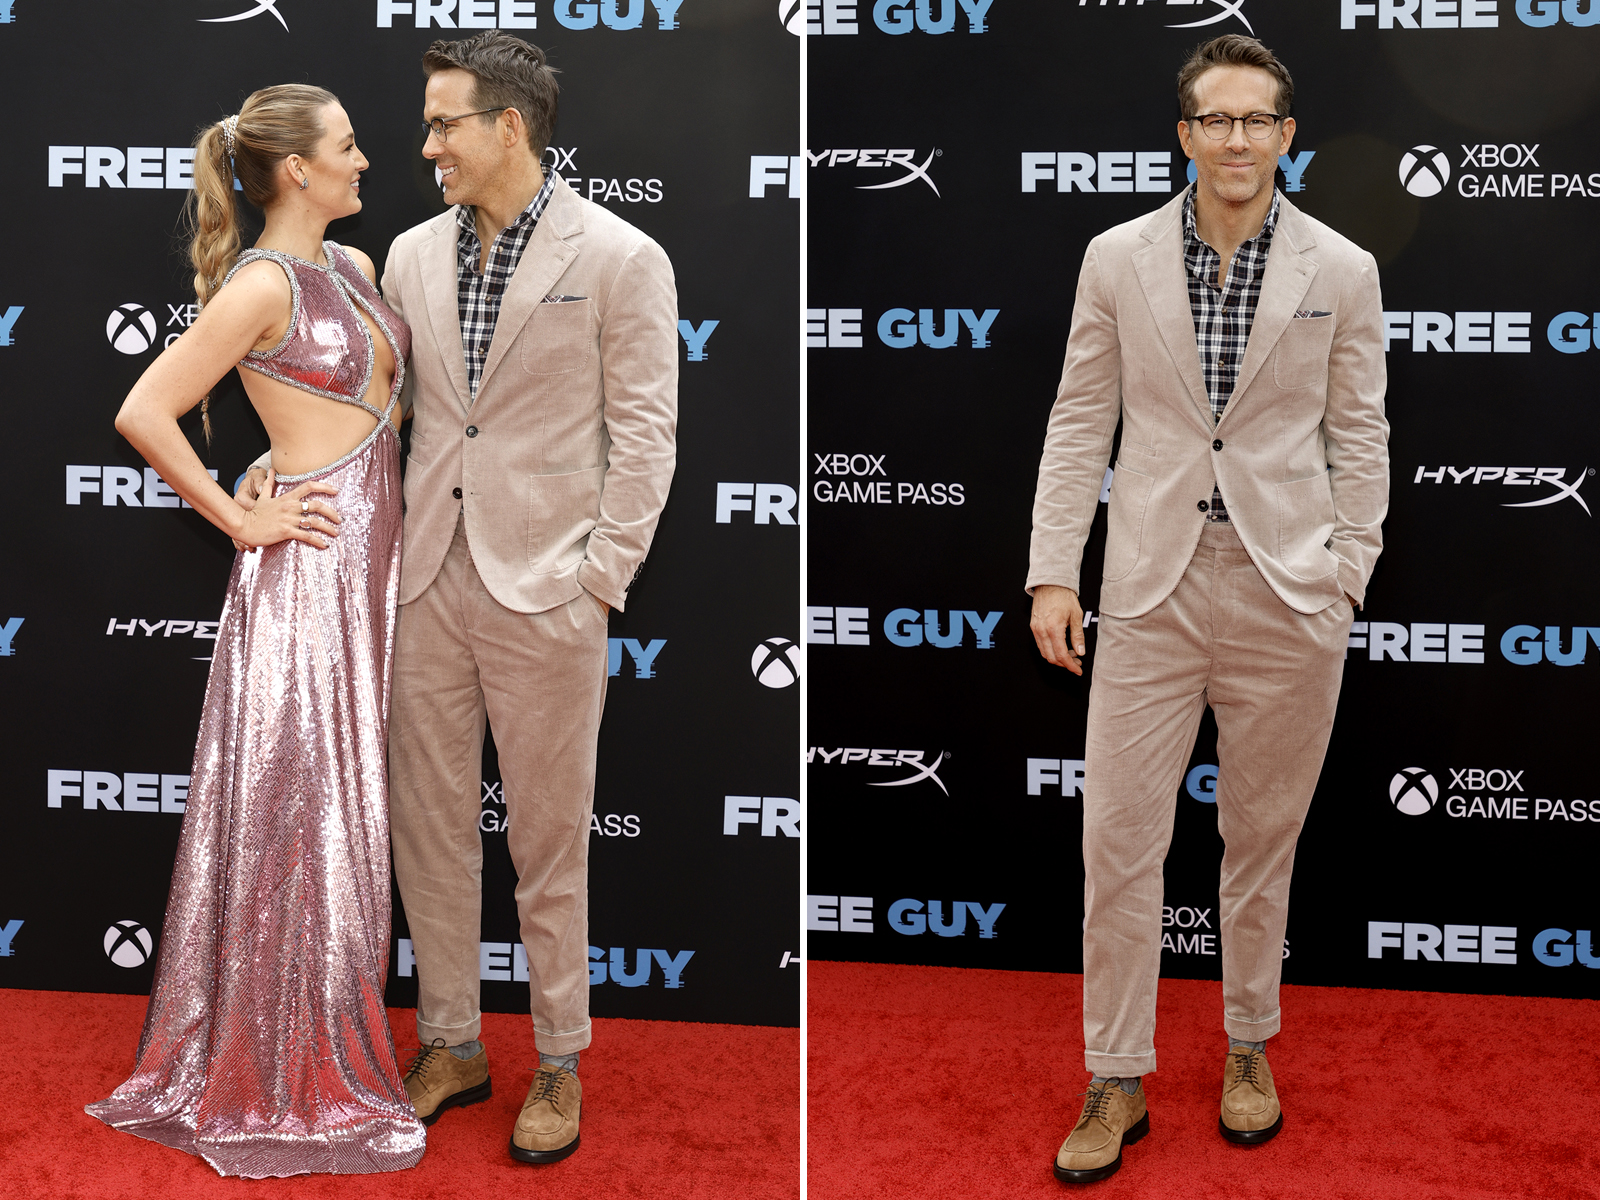 07-blake-lively-and-ryan-reynolds-gettyimages-1332217767.jpg